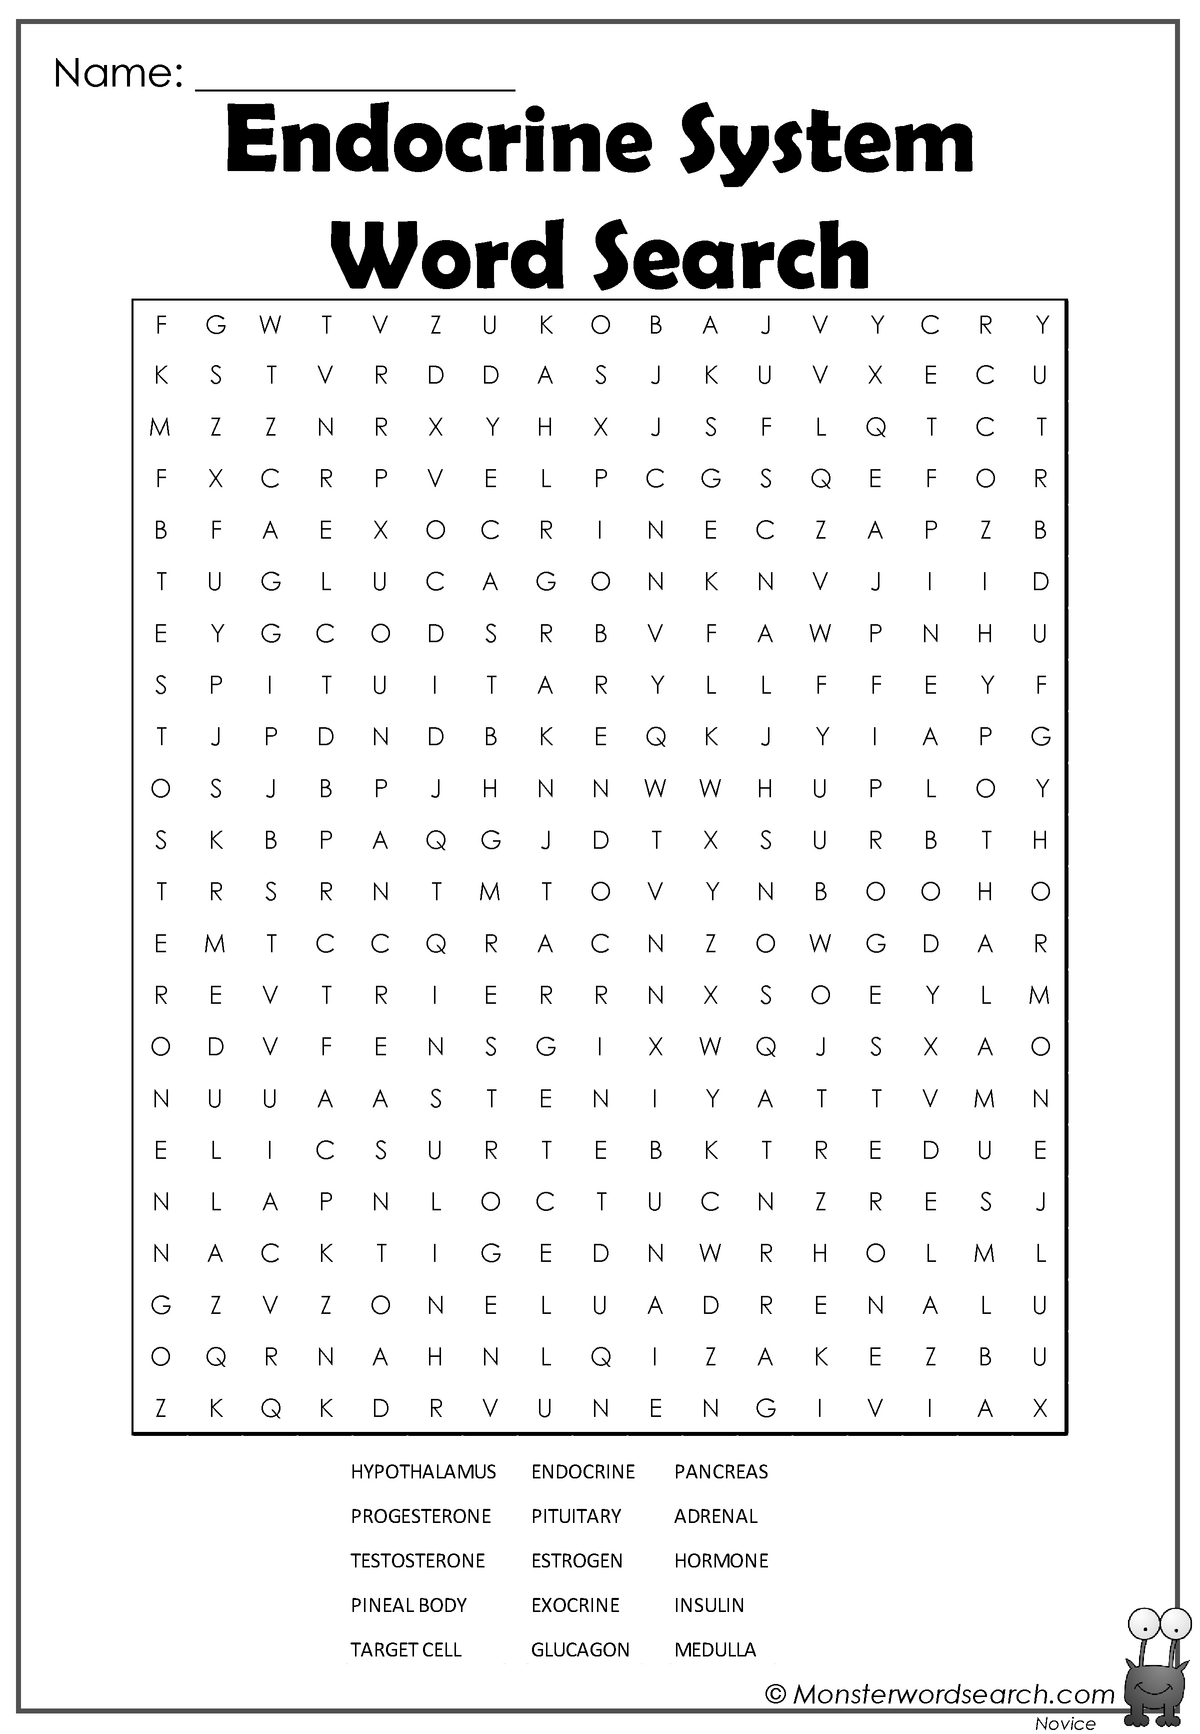 Endocrine System Word Search Answer Key